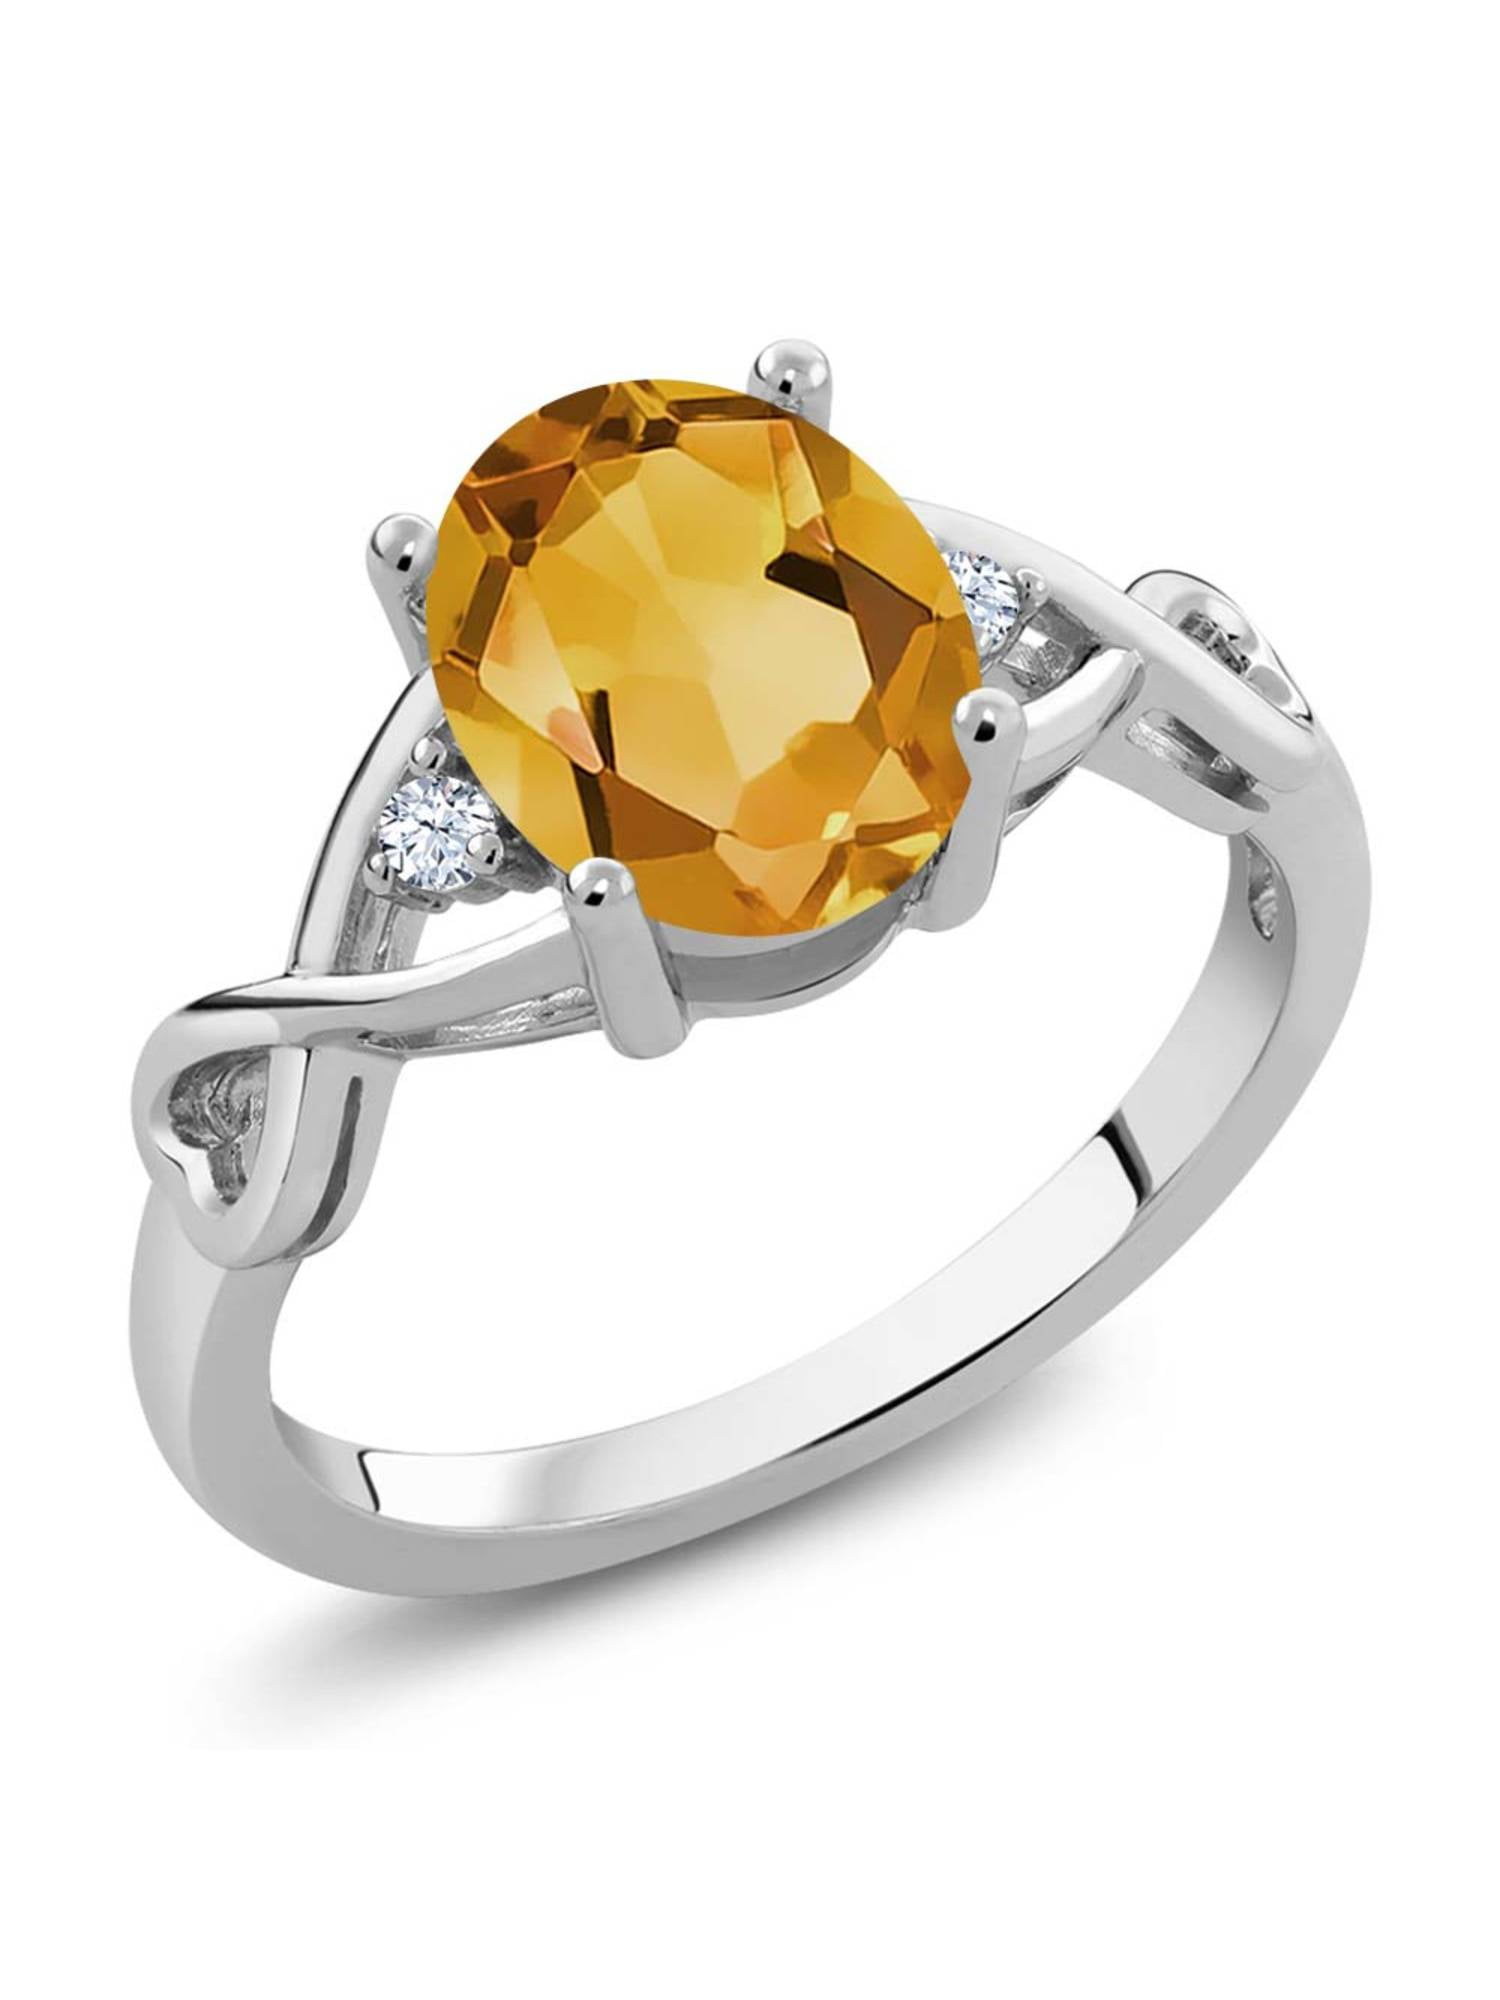 Gem Stone King - 925 Sterling Silver Yellow Citrine and White Topaz